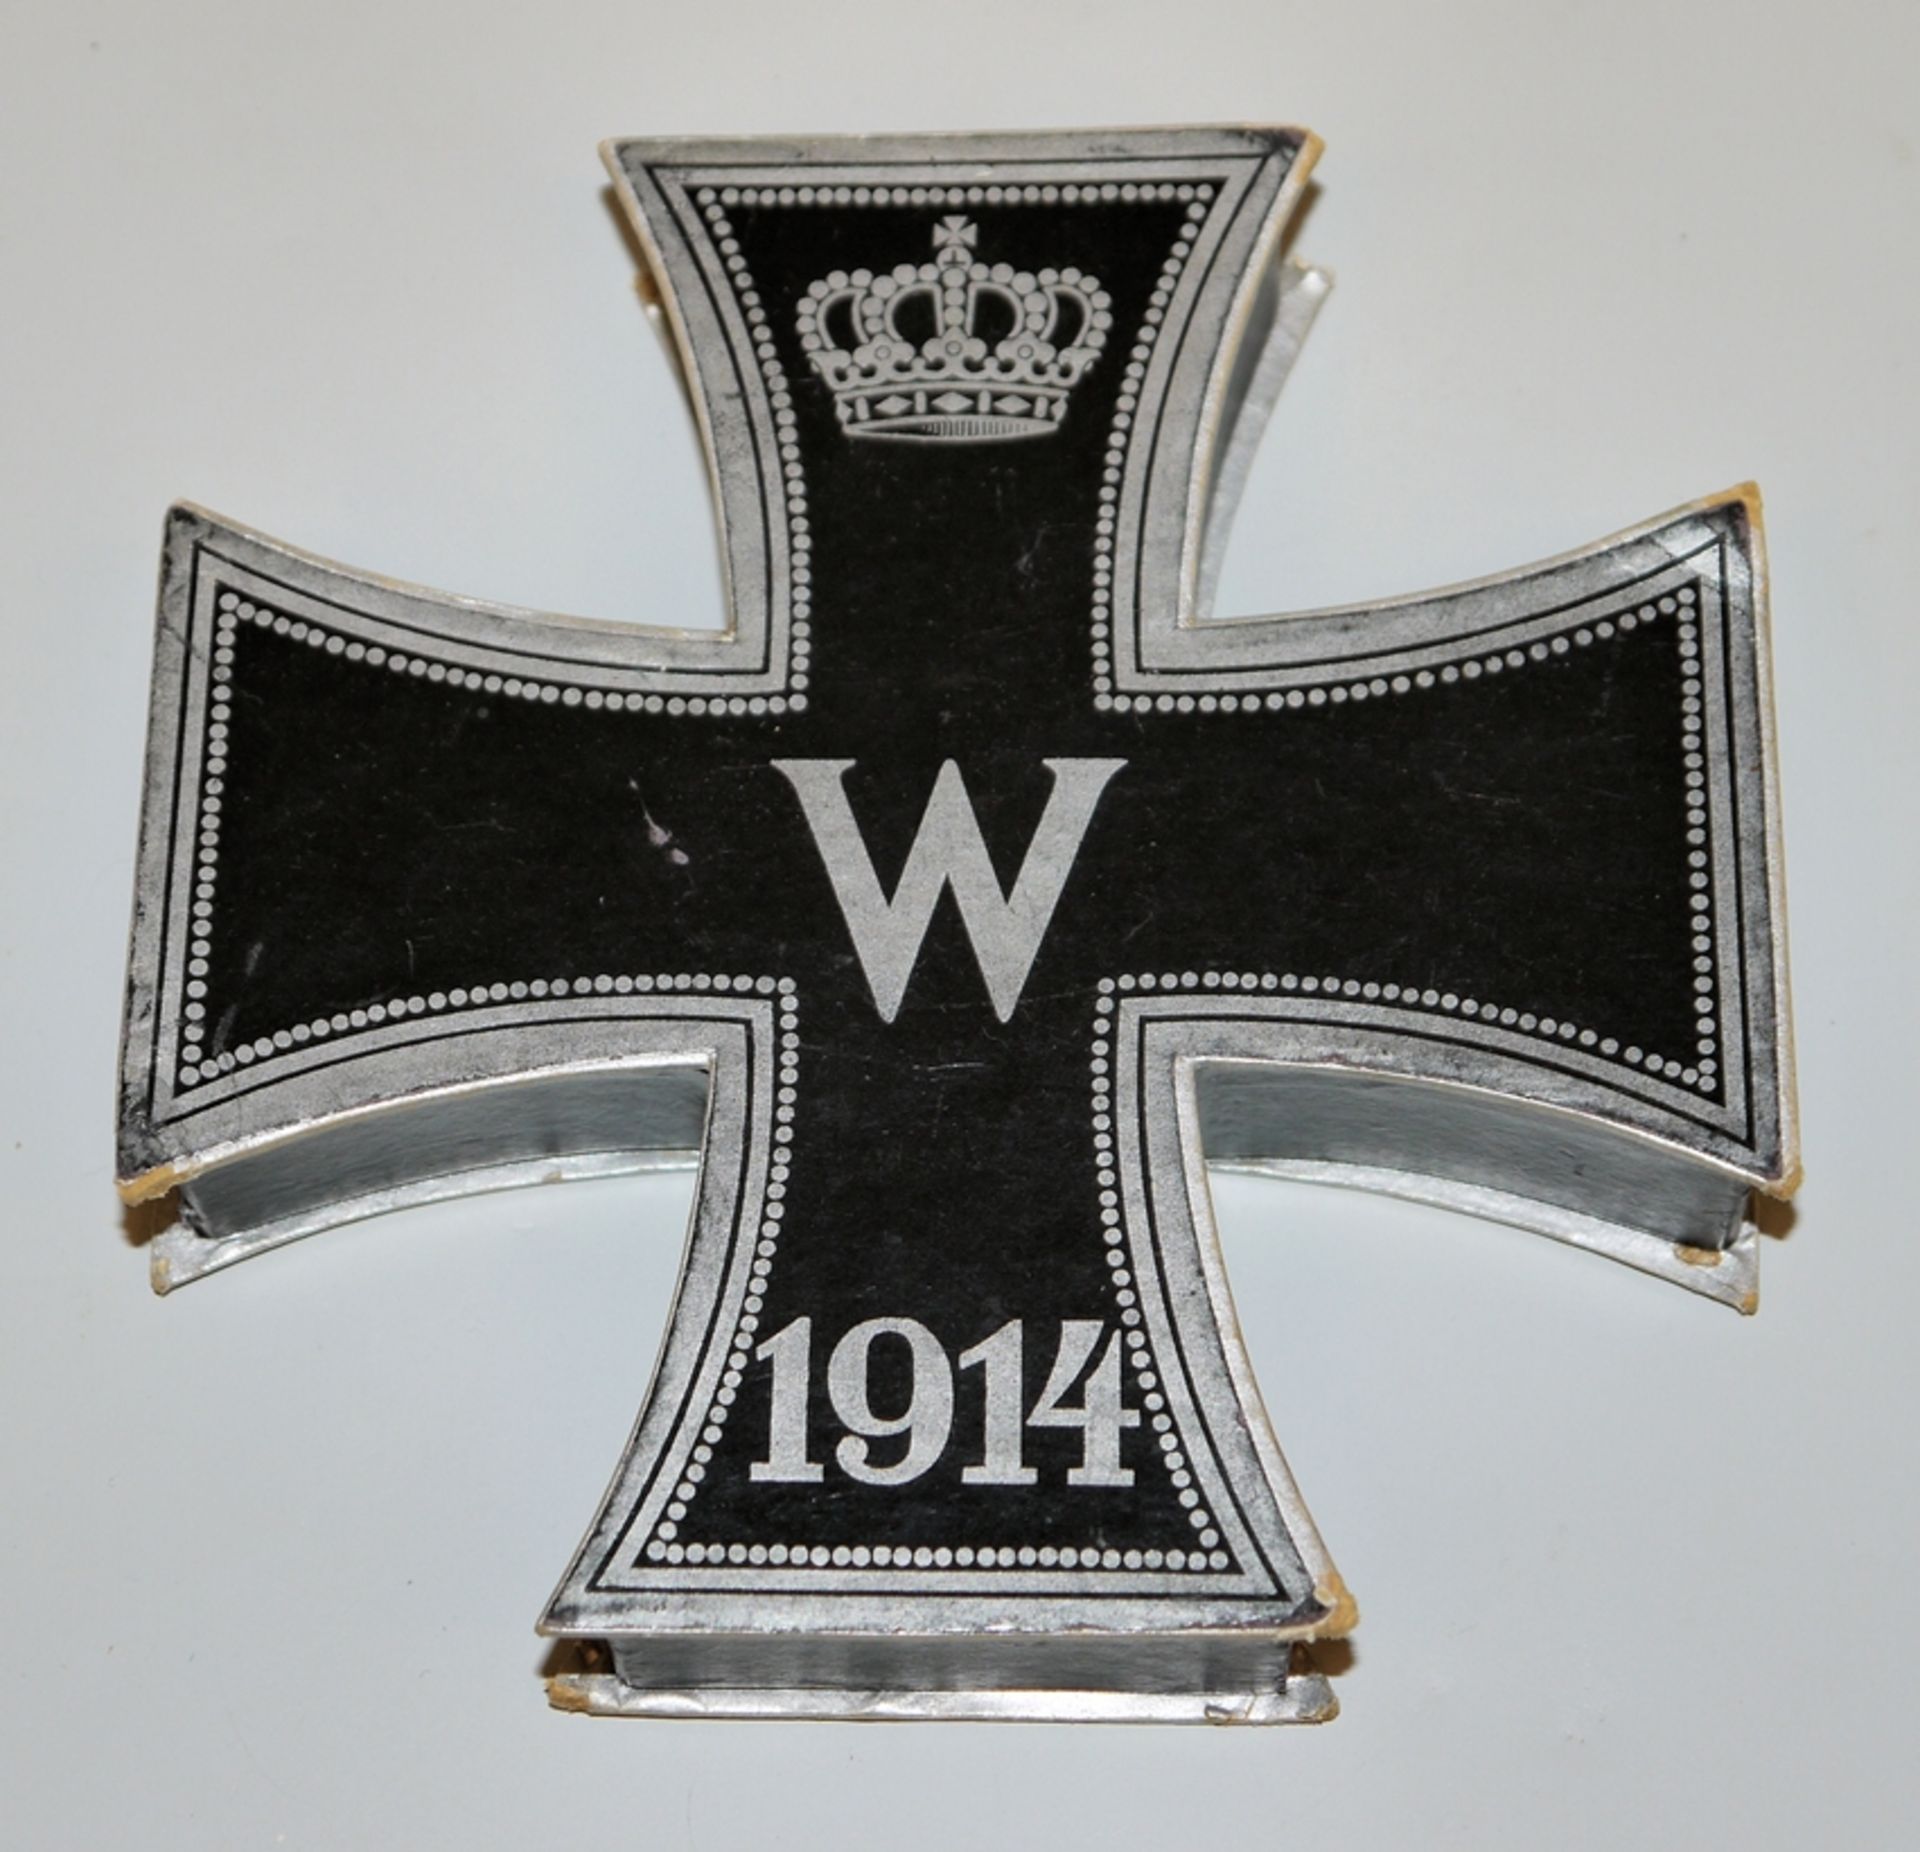 Patriotic confectionery box in the shape of the Iron Cross 1914